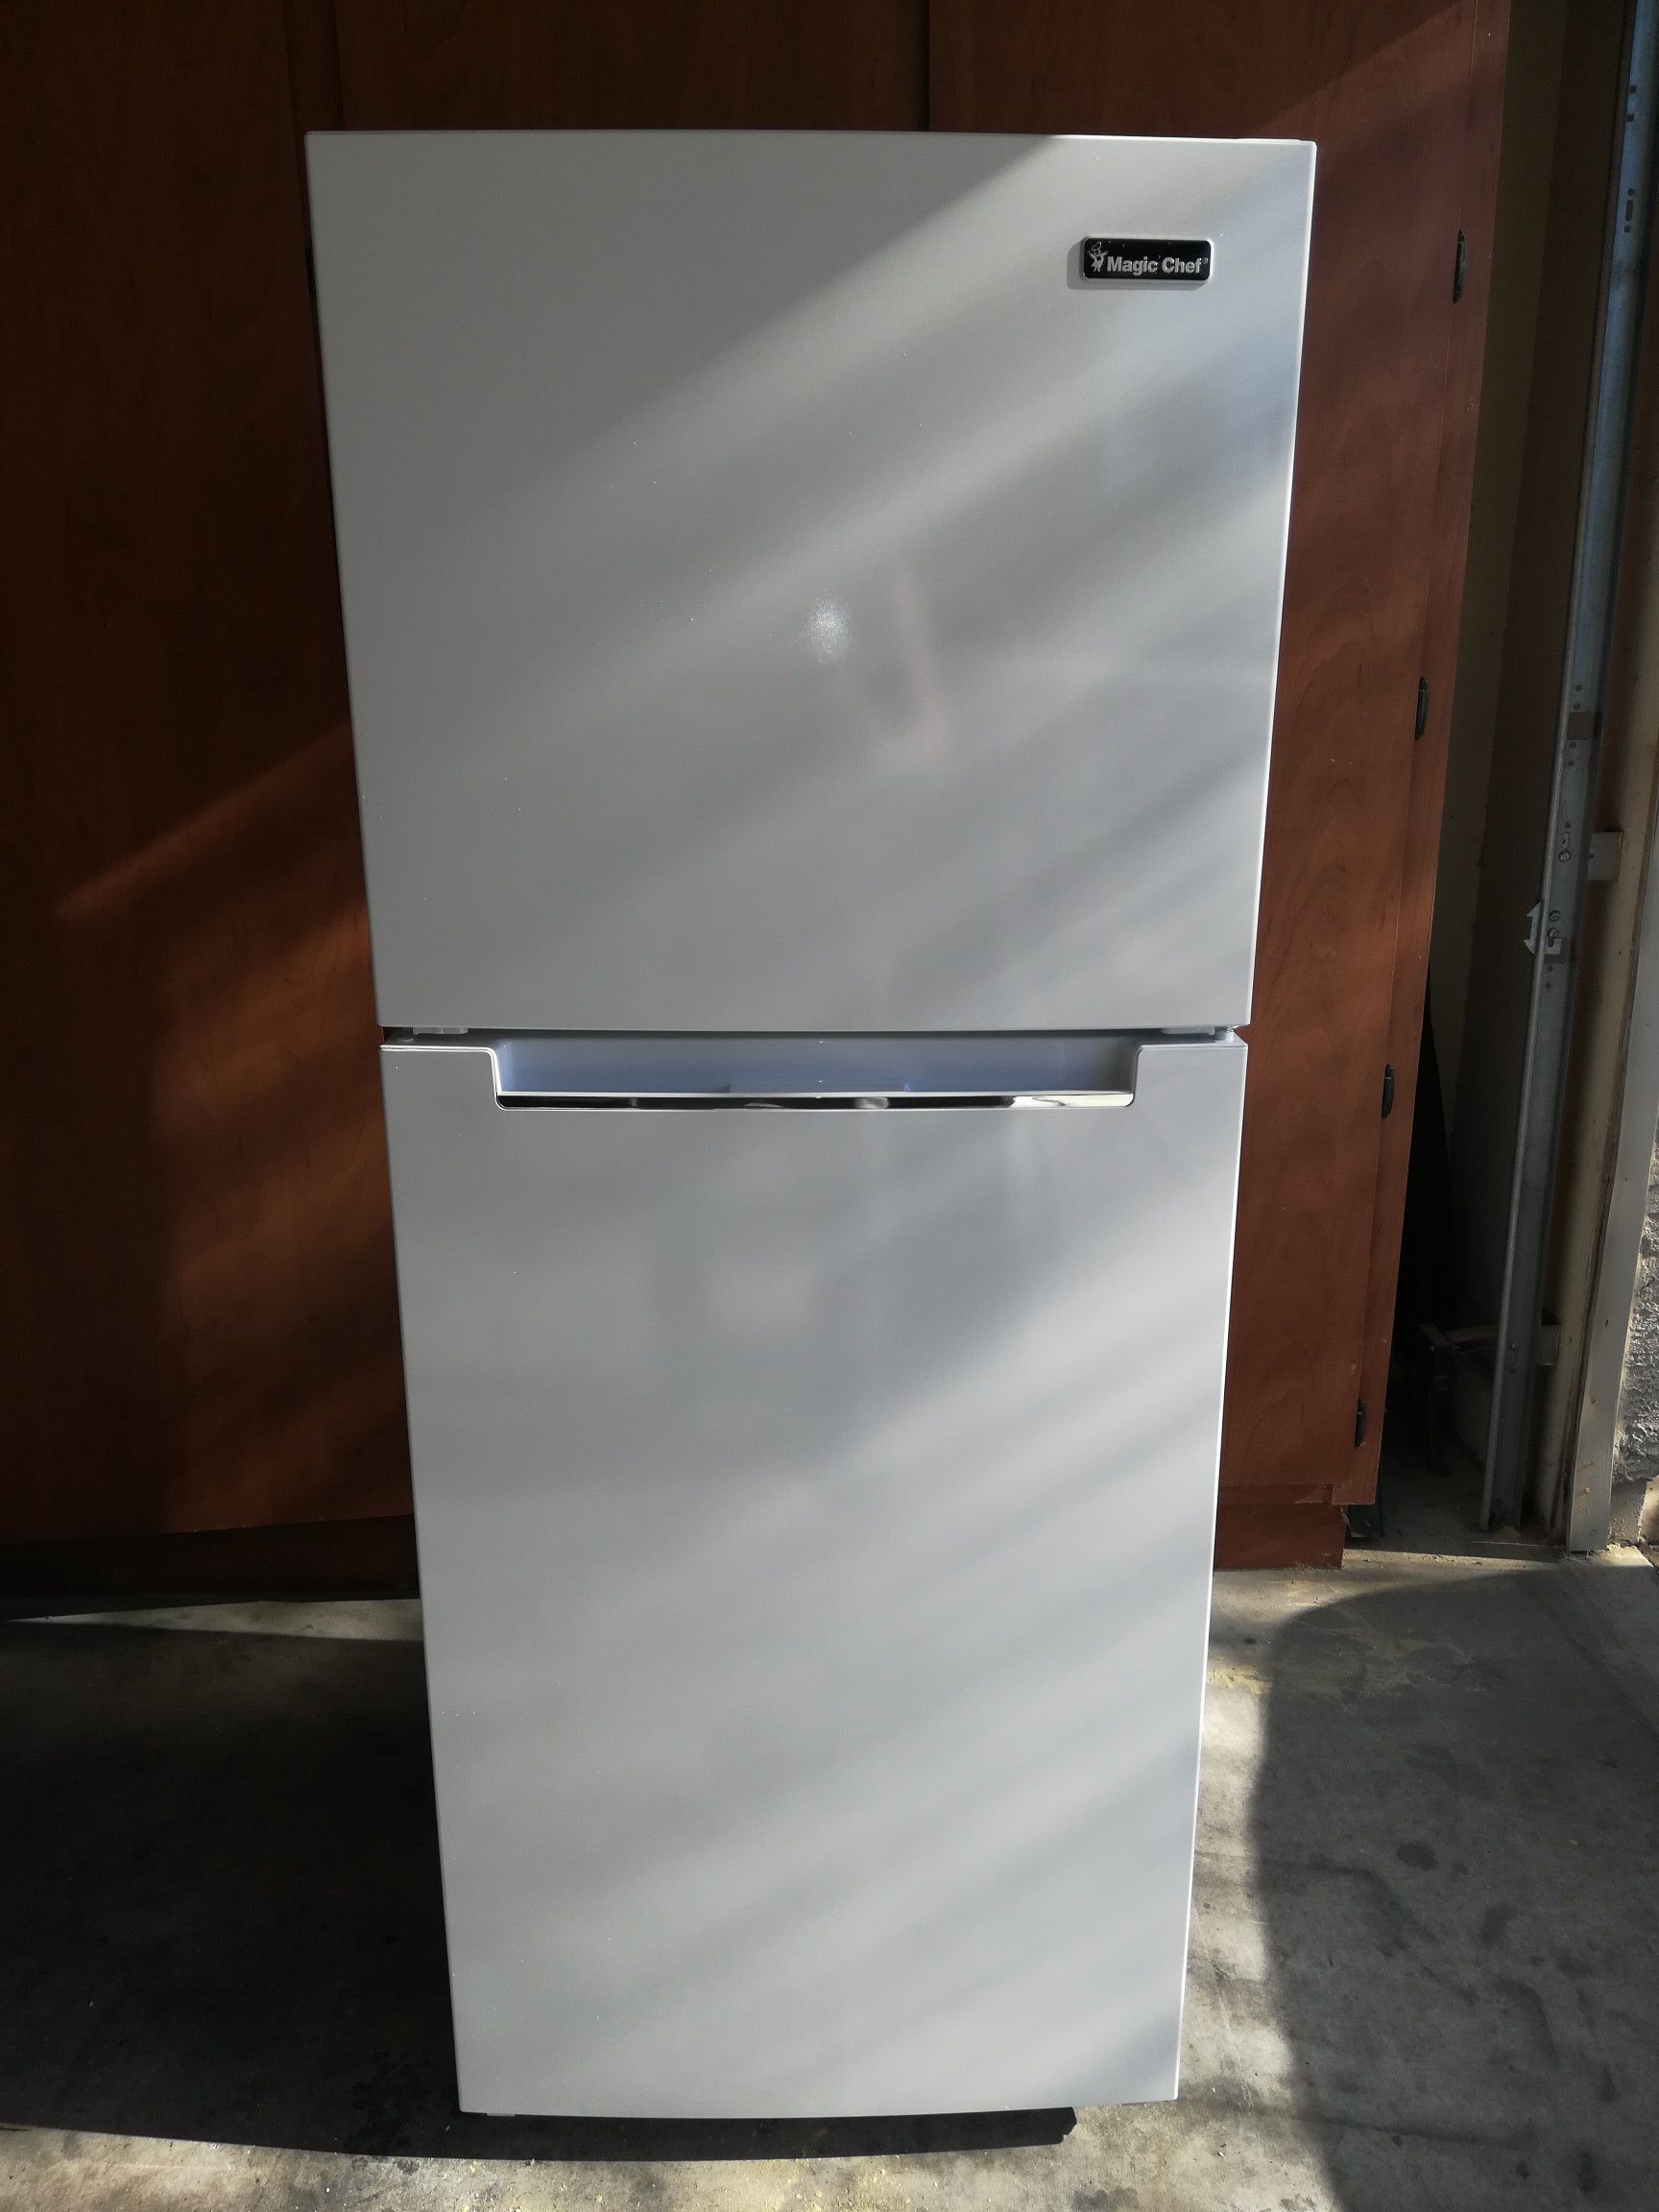 ~BRAND NEW~ Beer Fridge Magic Chef 10 Cu. Ft. Refrigerator, Plugged in and Ice Cold!